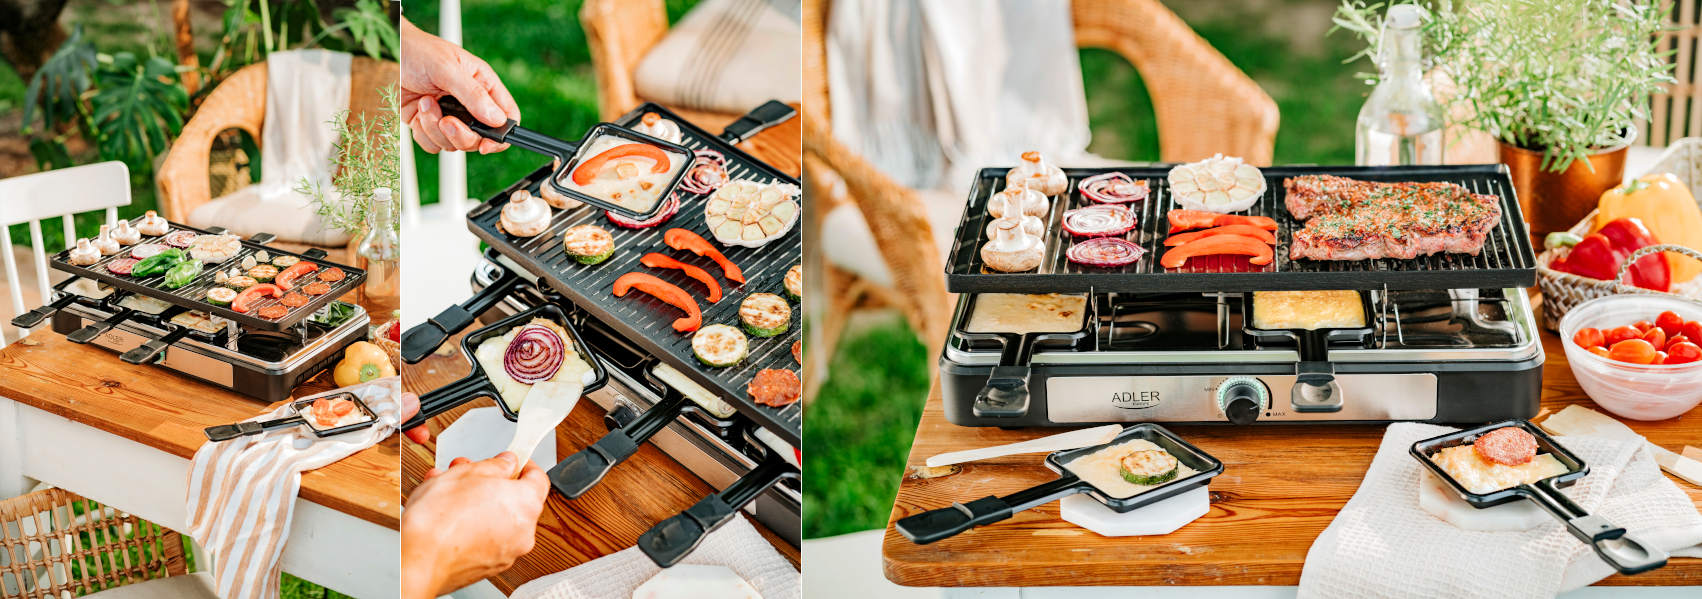 Grill-raclette-AD-6616-2